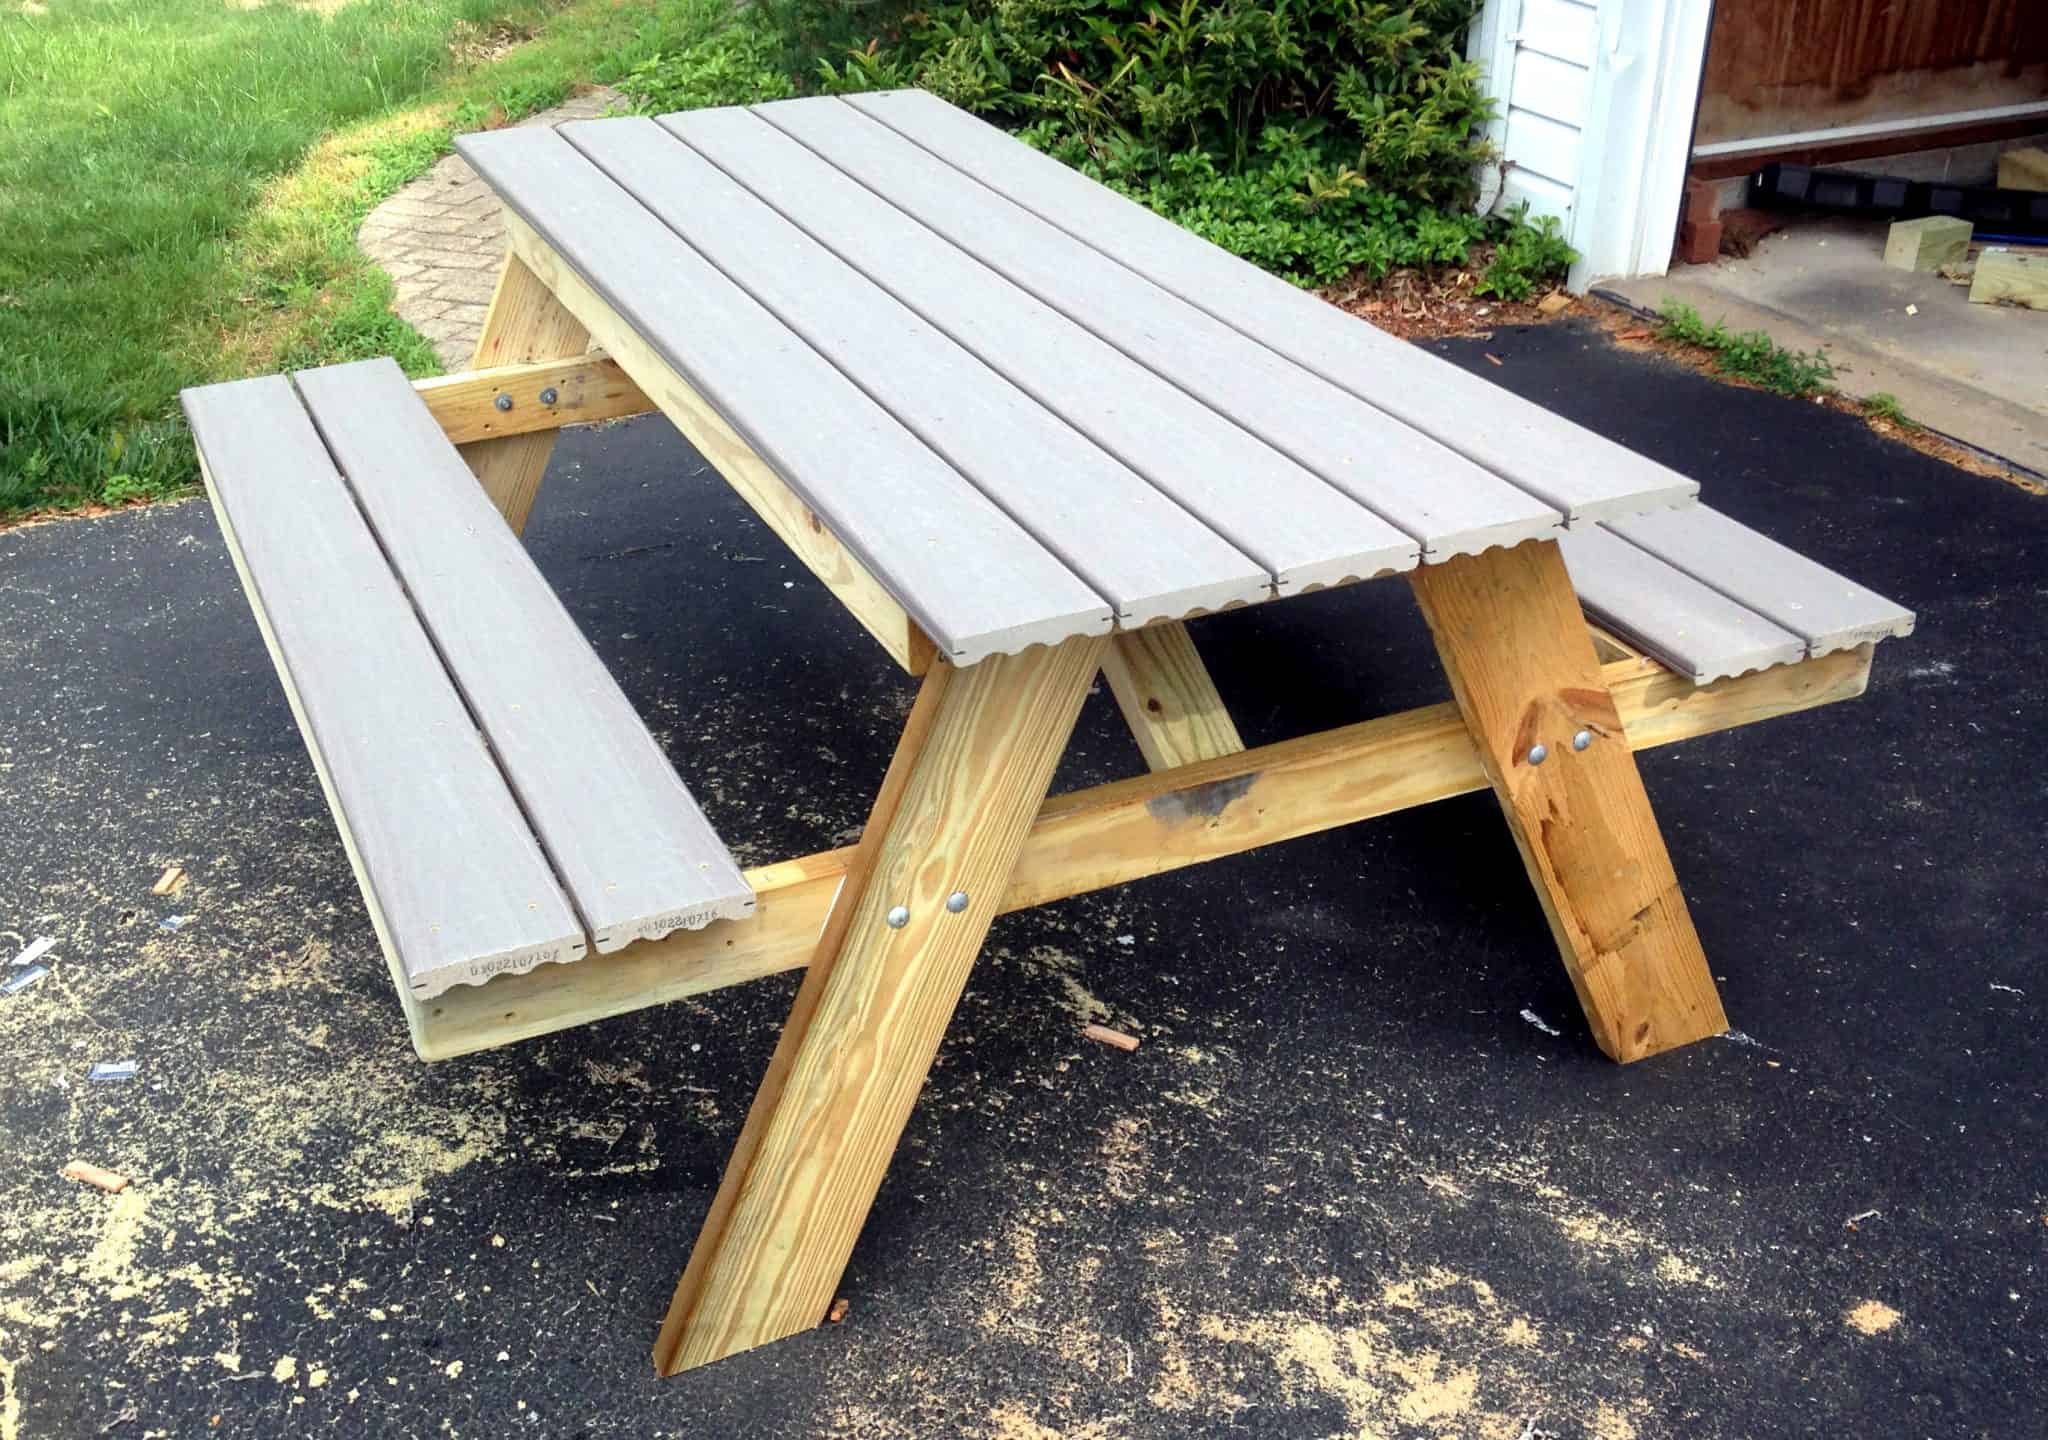 20 DIY Picnic Table Ideas to Build this Summer - The Handyman's Daughter